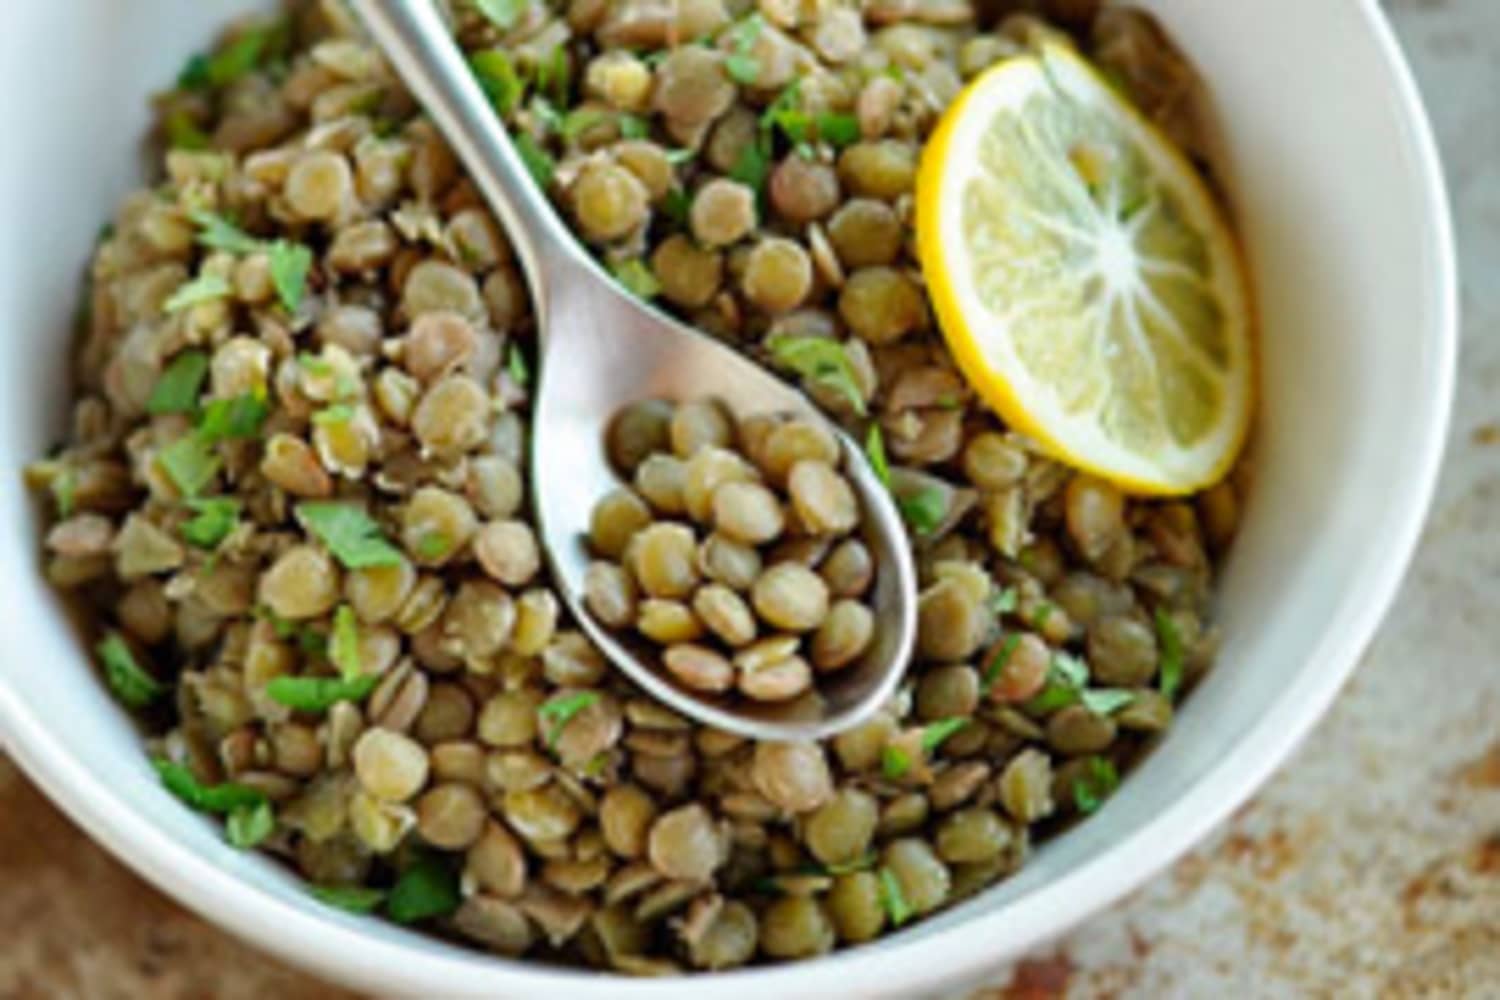 Are Old Lentils and Split Peas Safe to Eat? - The Kitchn